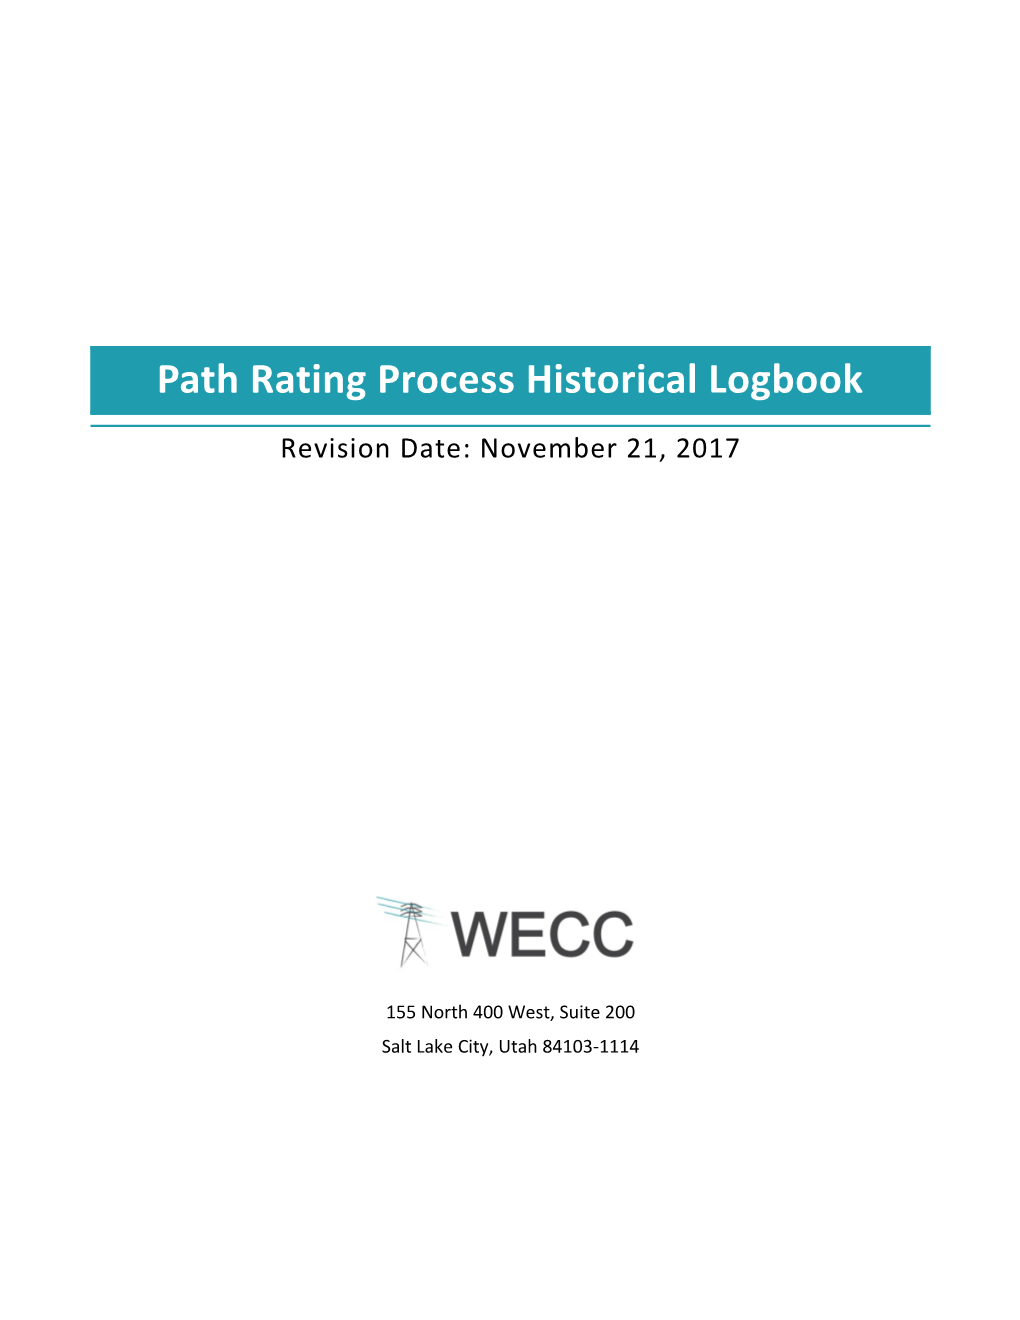 Path-Rating-Logbook-Historical